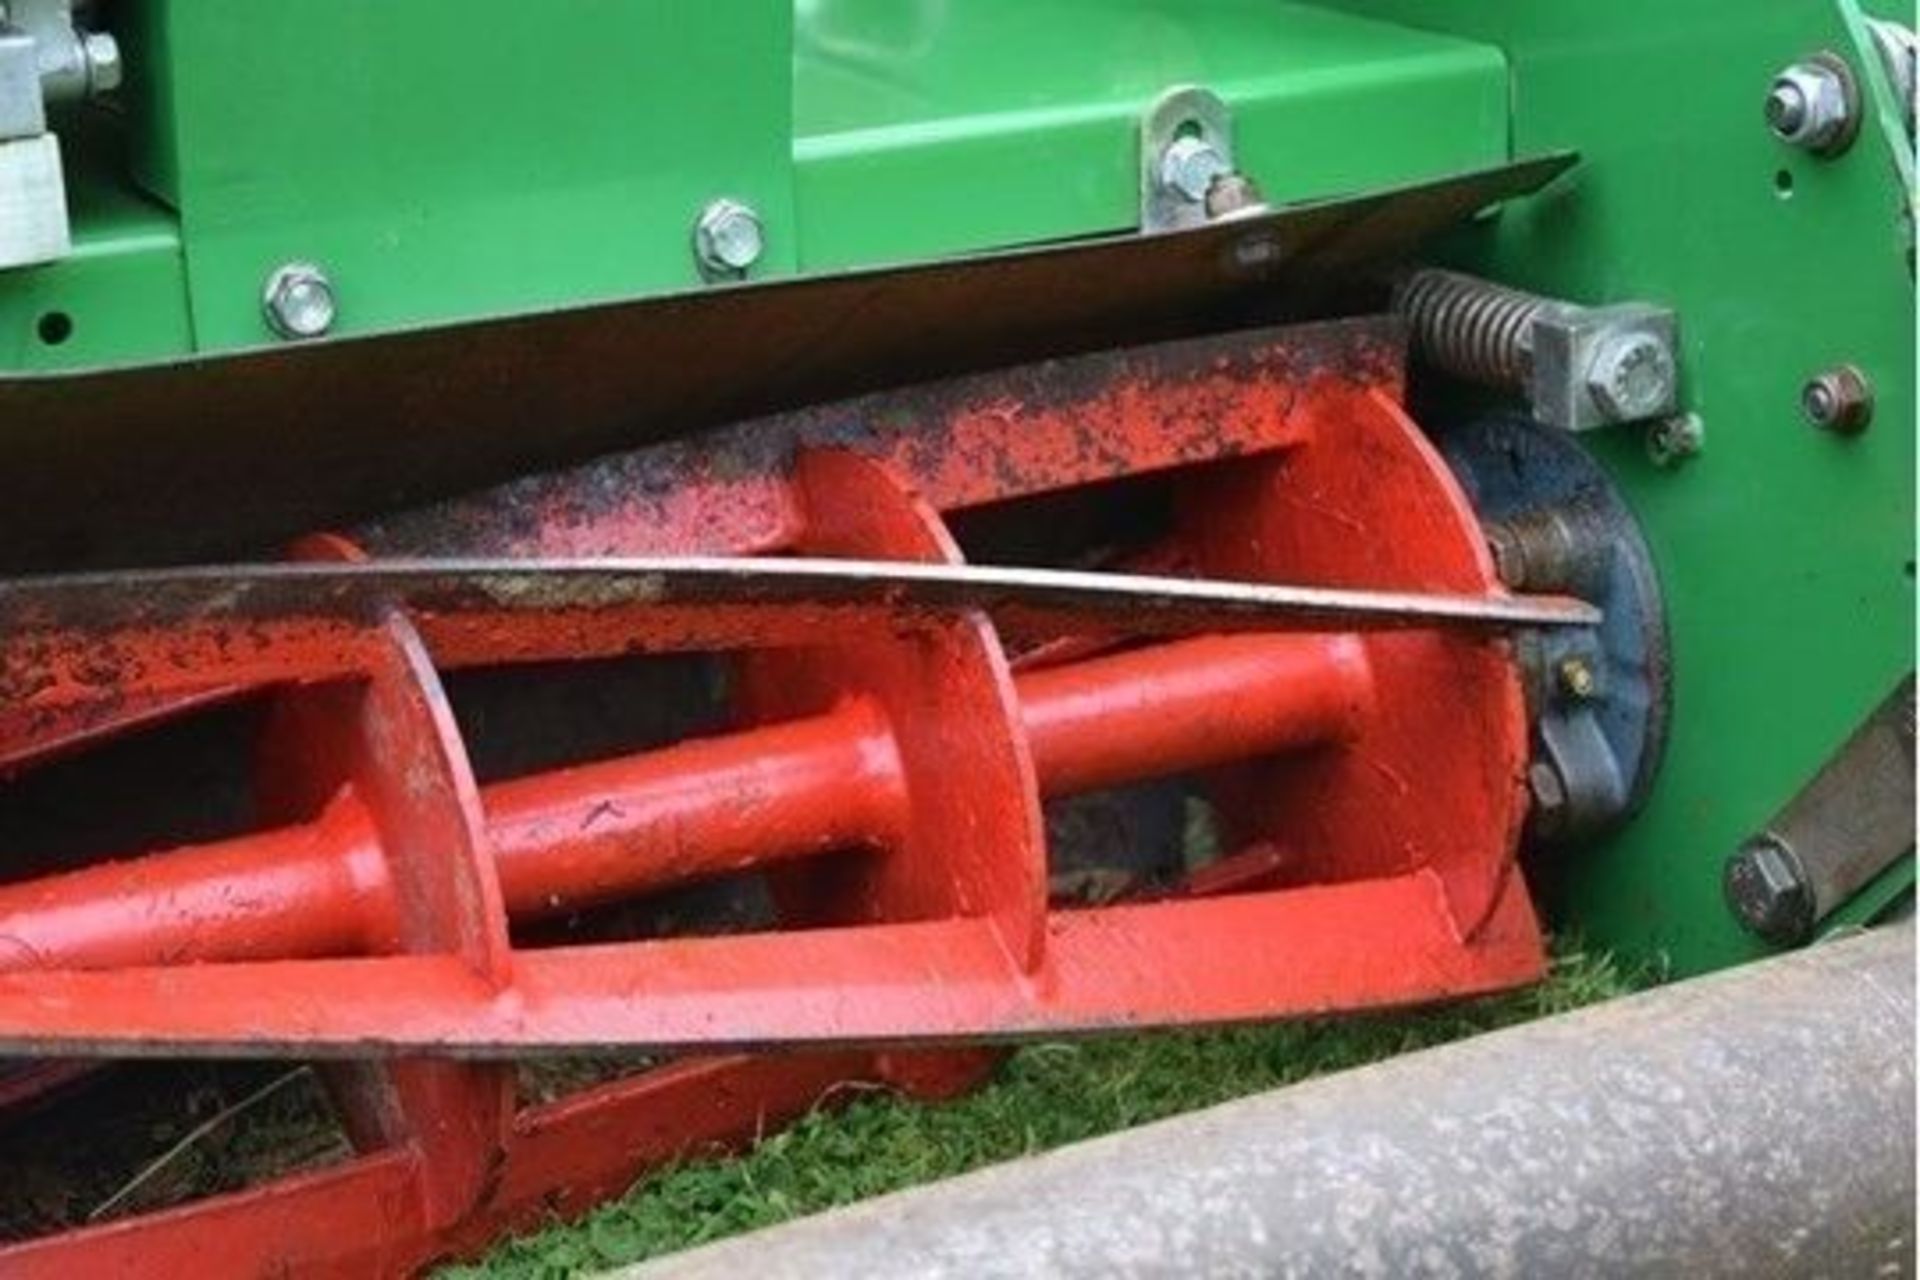 2004 Dennis G560 5 Blade Cylinder Mower With Grass Box - Image 11 of 11